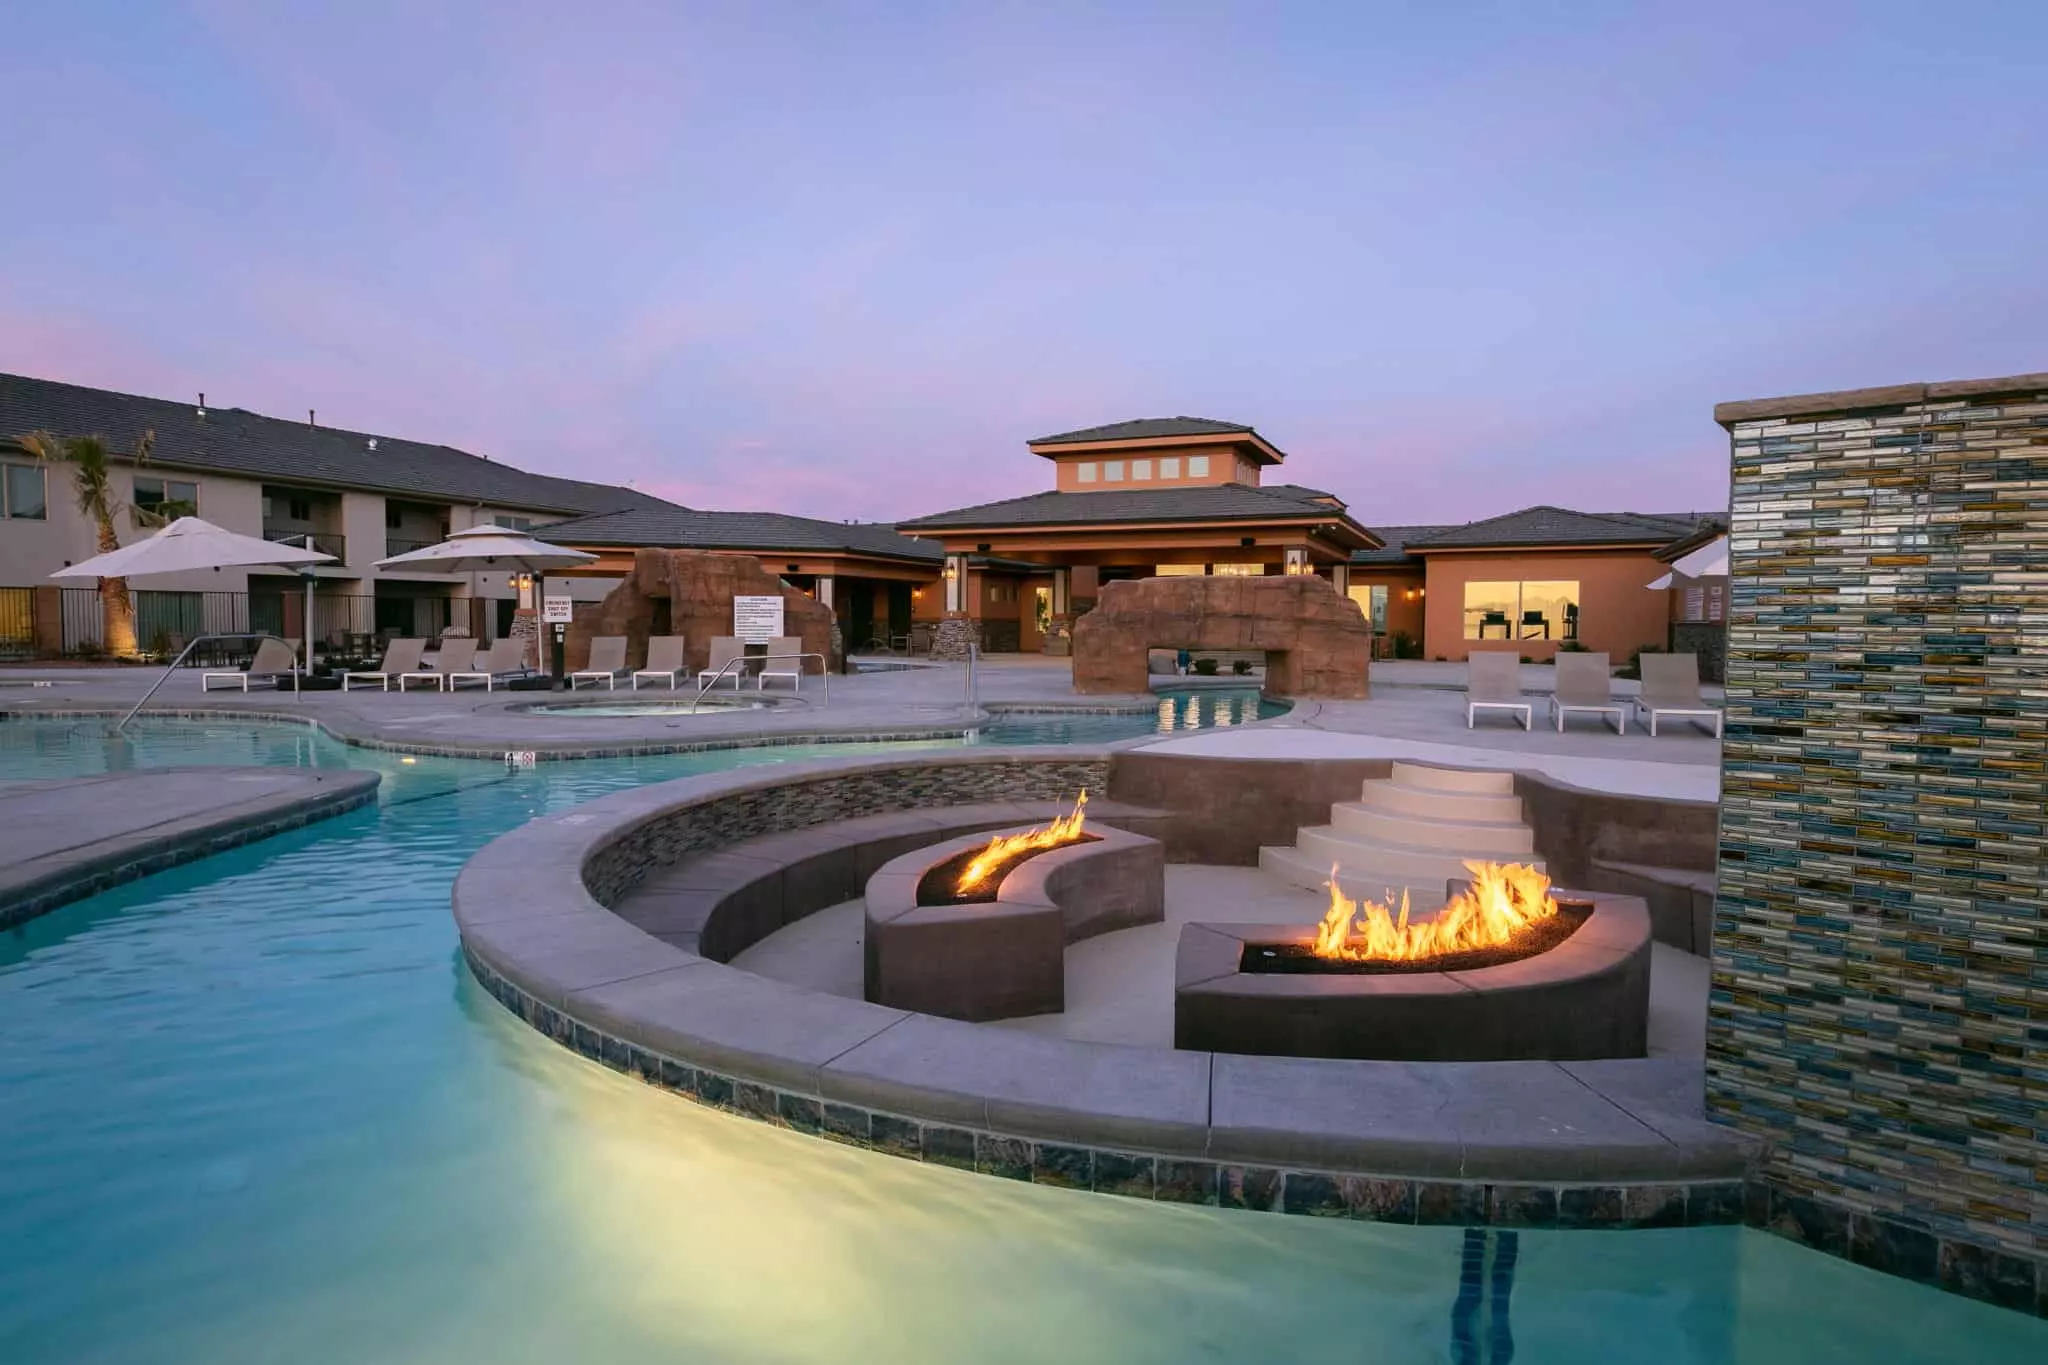 fire pits surrounded by lazy river